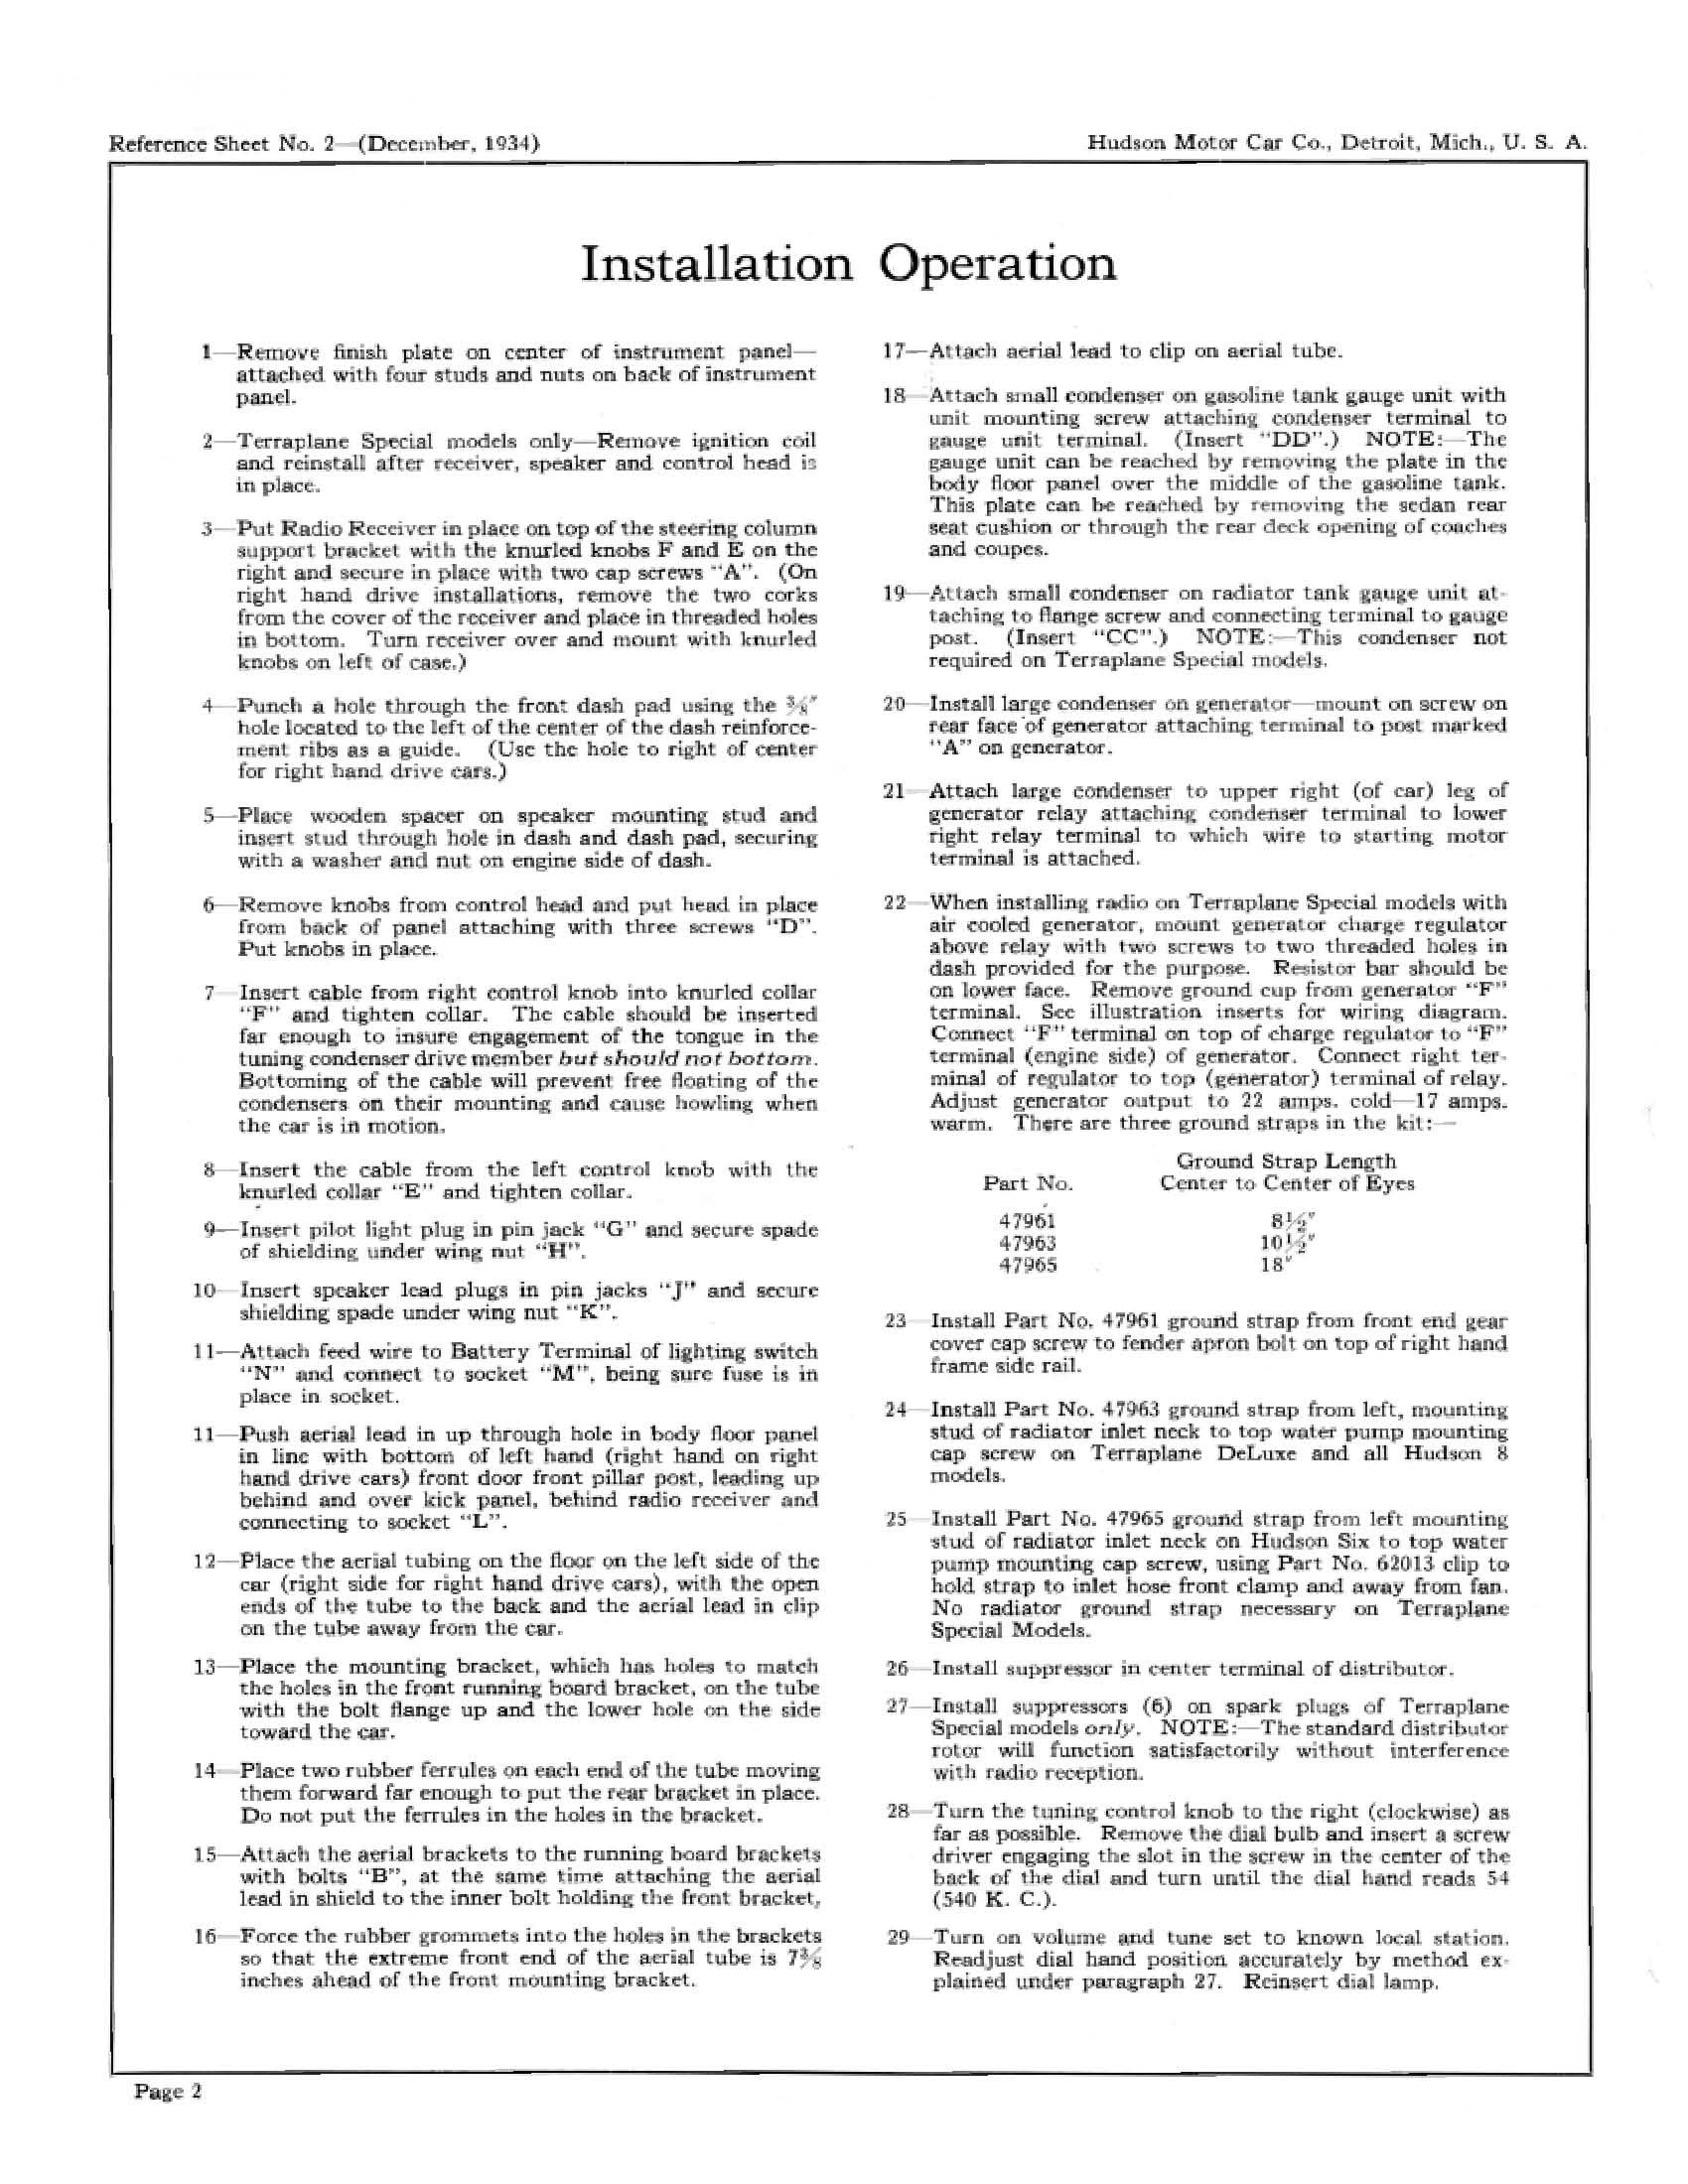 1935 Hudson Reference Sheets Page 2